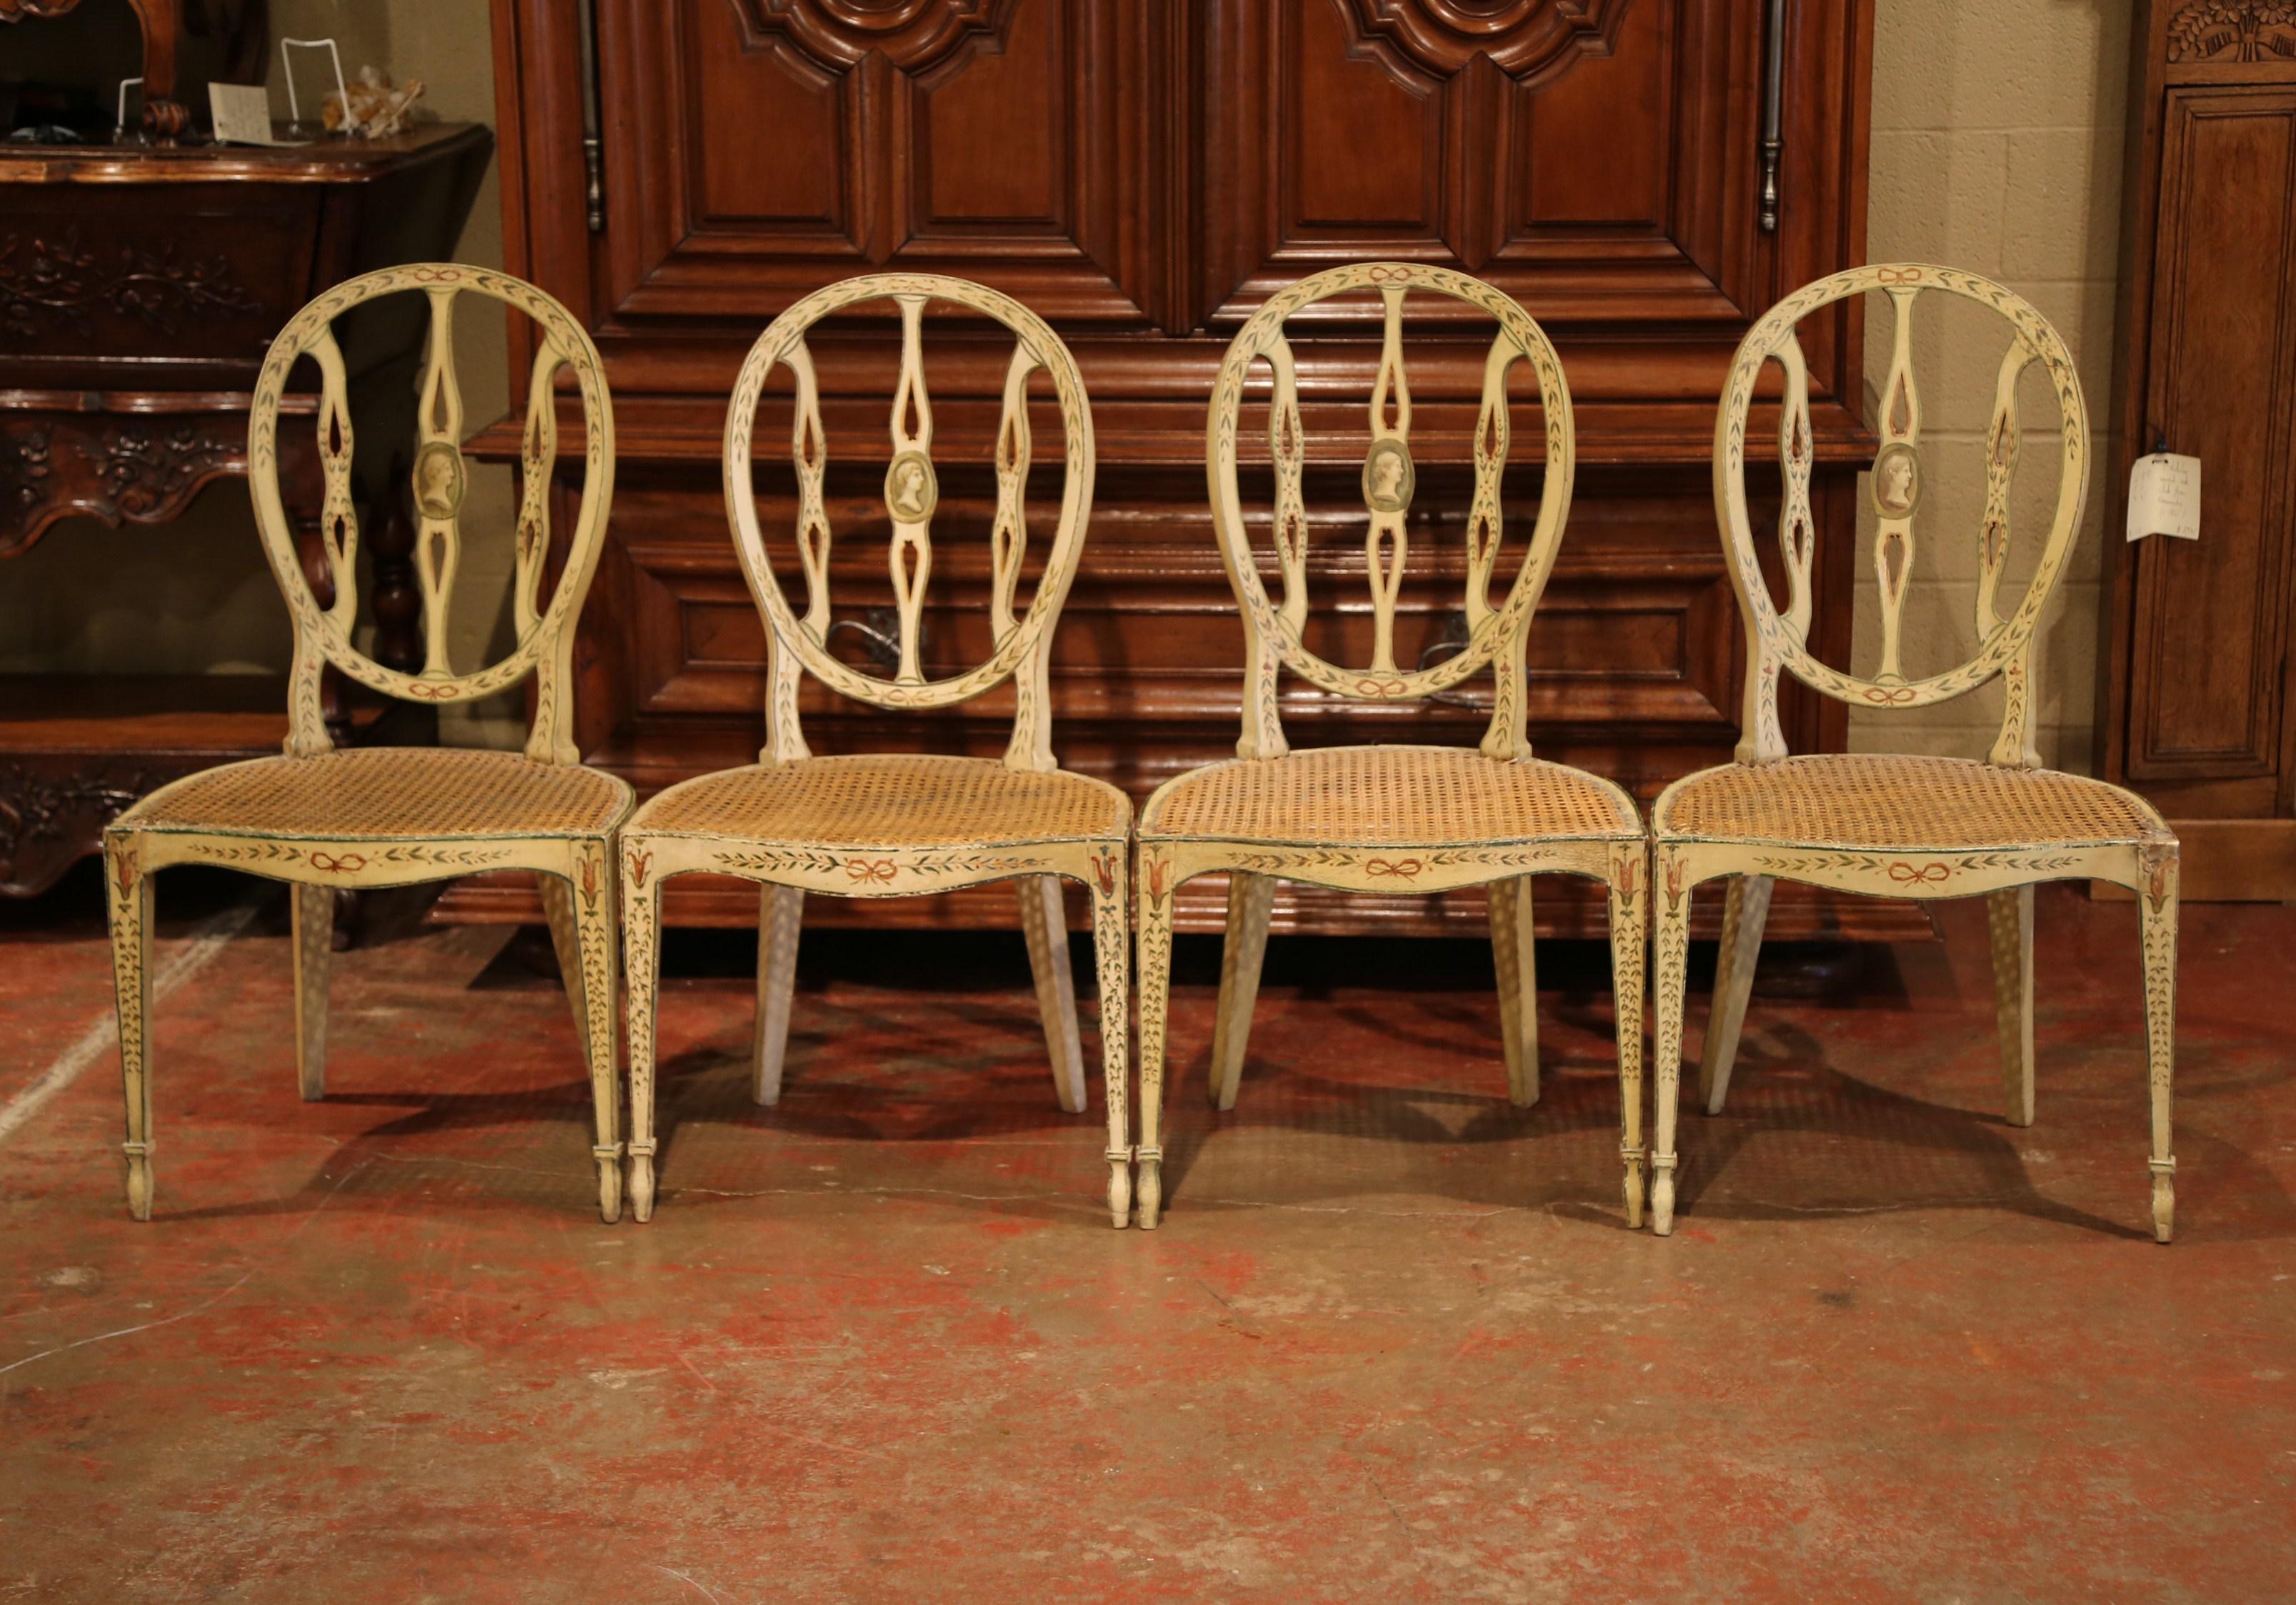 Use this colorful set of carved, antique chairs around a game table or breakfast table. Crafted in England, circa 1850, each delicate chair has tapered legs, and an oval back with a hand painted center medallion. The central medallion is further